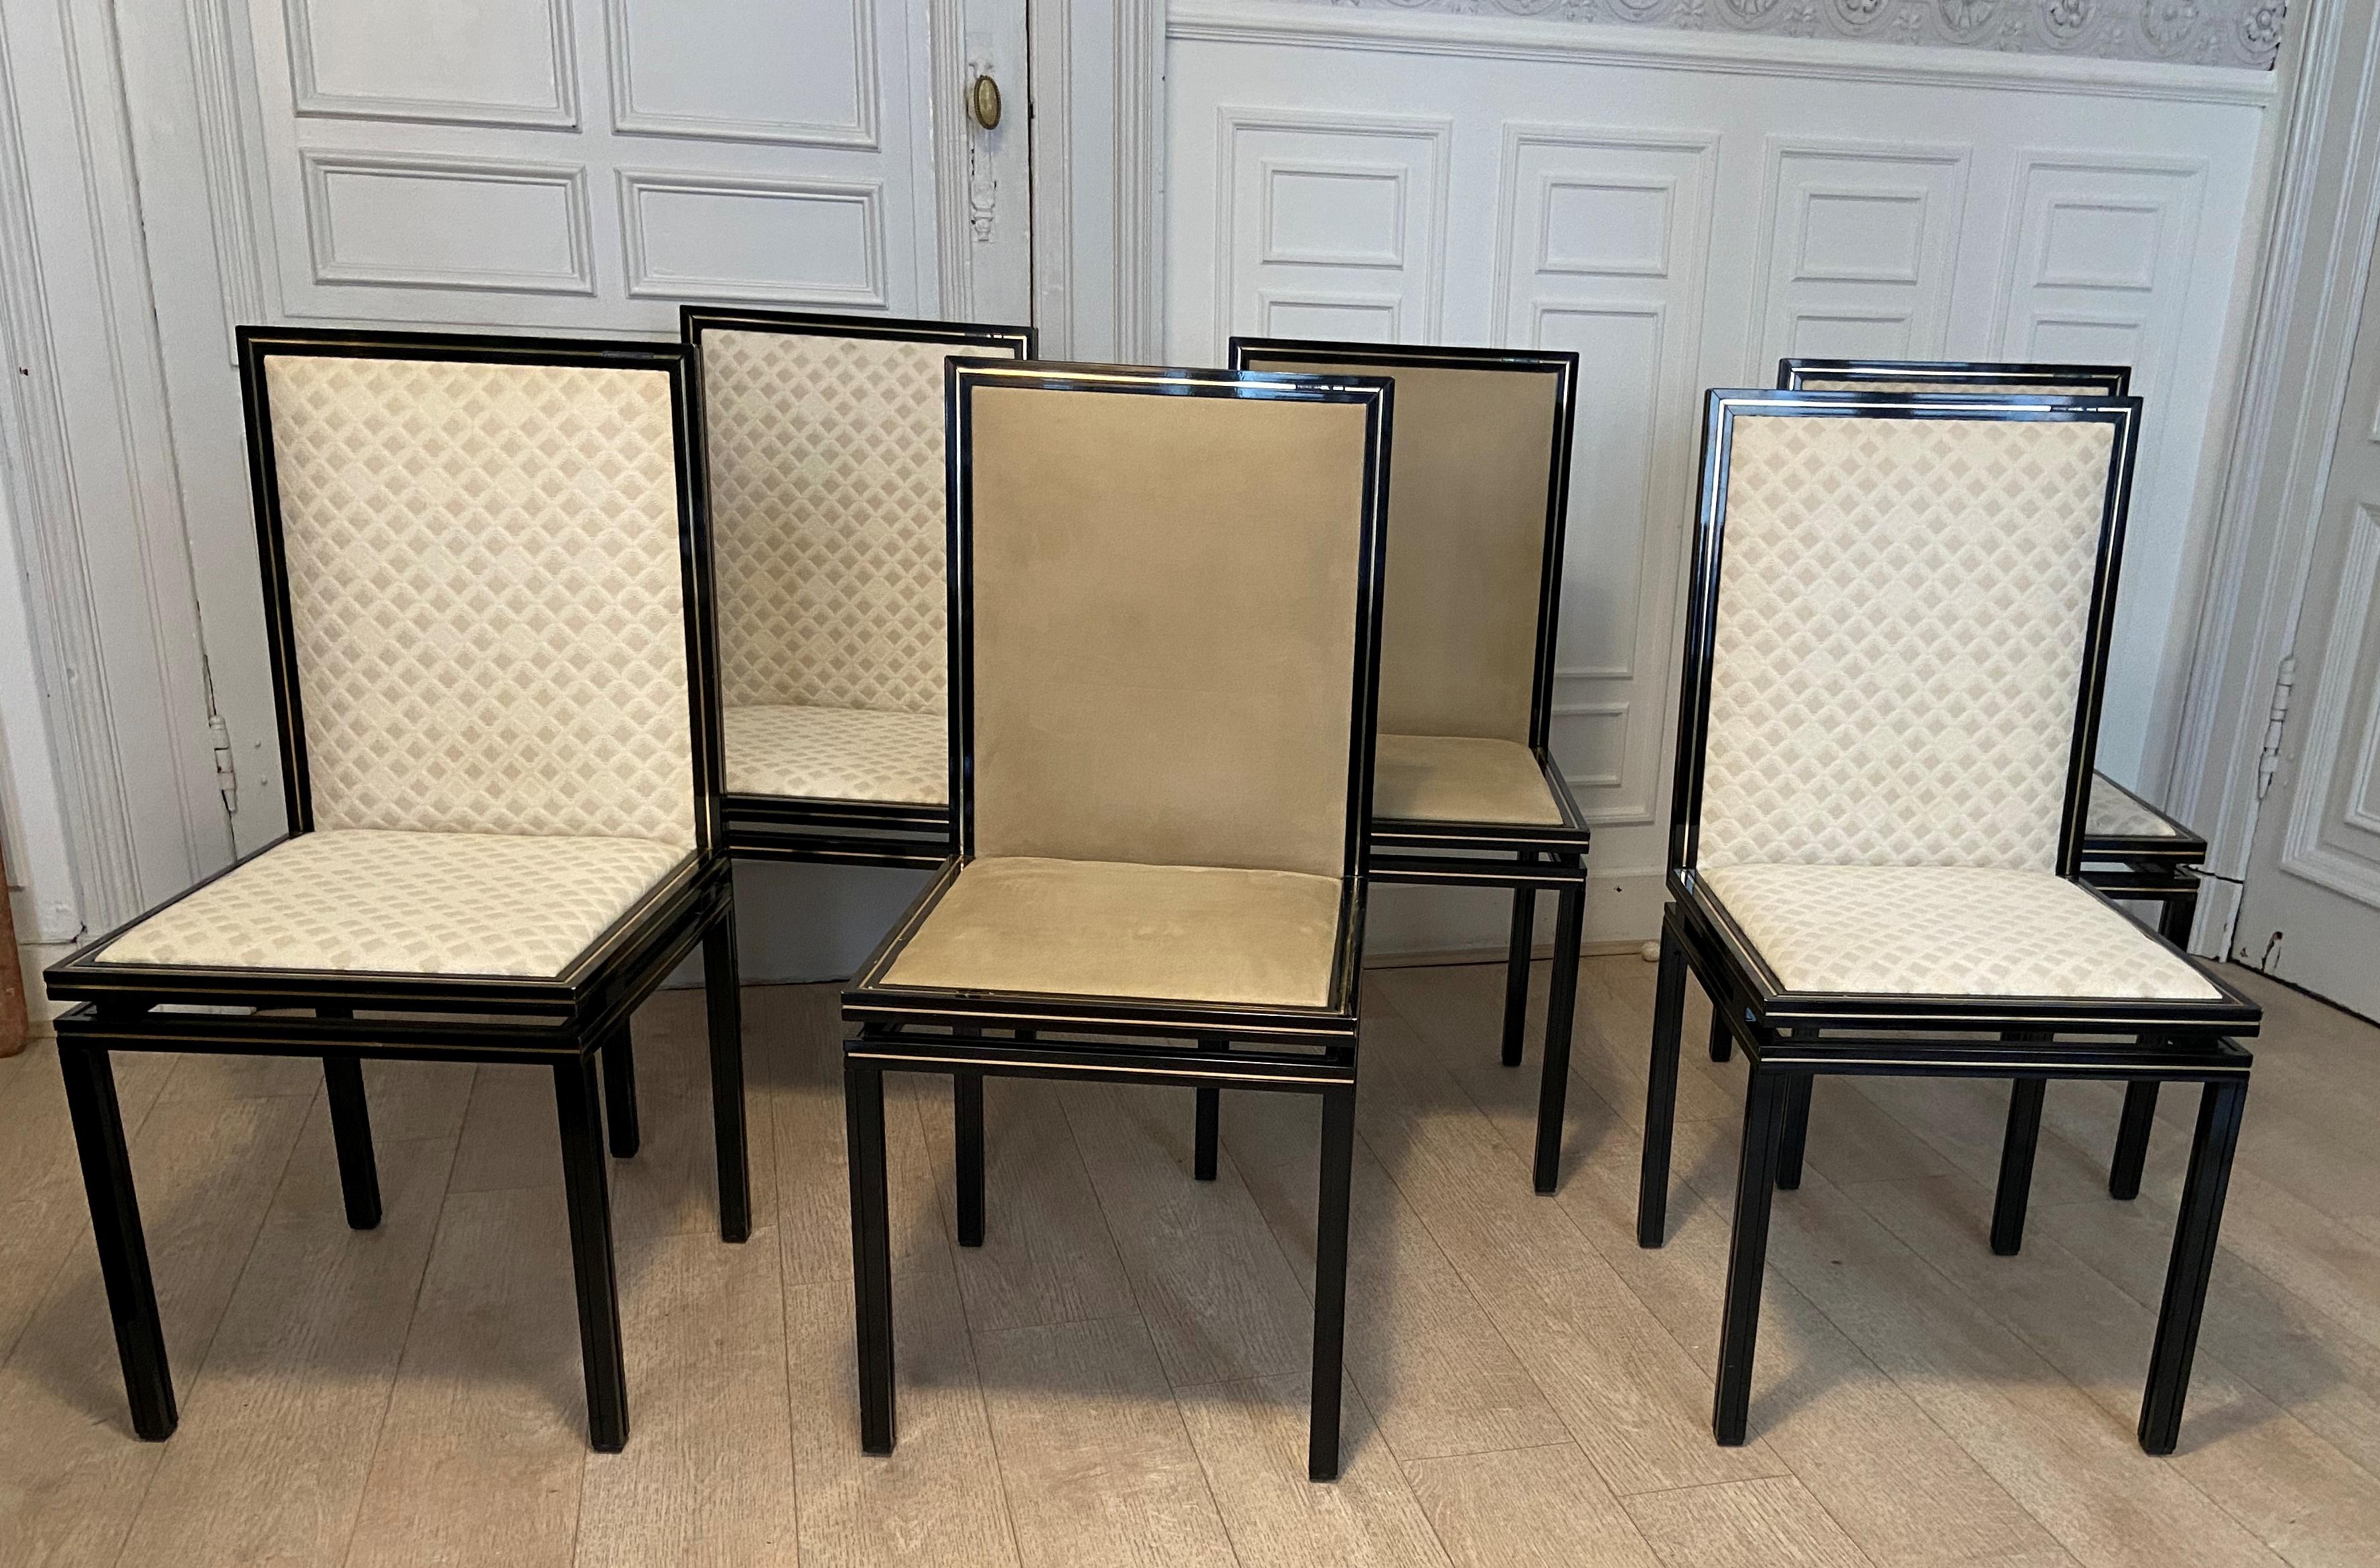 Aluminum Mid-Century Modern Dining Room Chairs by Pierre Vandel, France 1970s Set of 4+2 For Sale